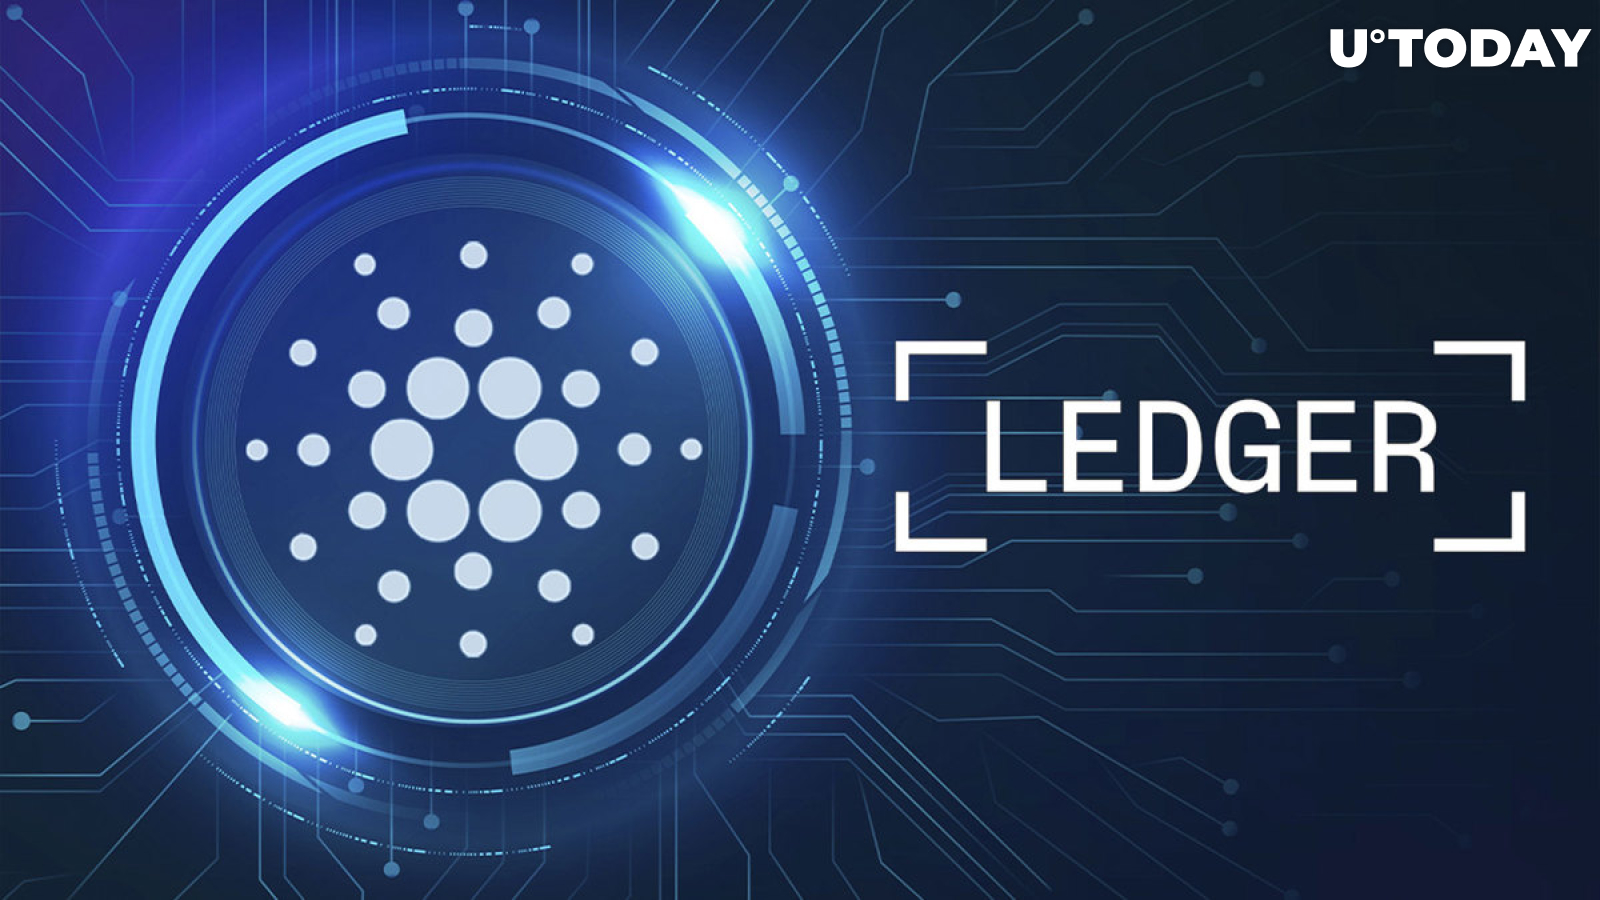 Cardano (ADA) Users on Ledger Might Have Issues Sending Their Assets Due to This: Details